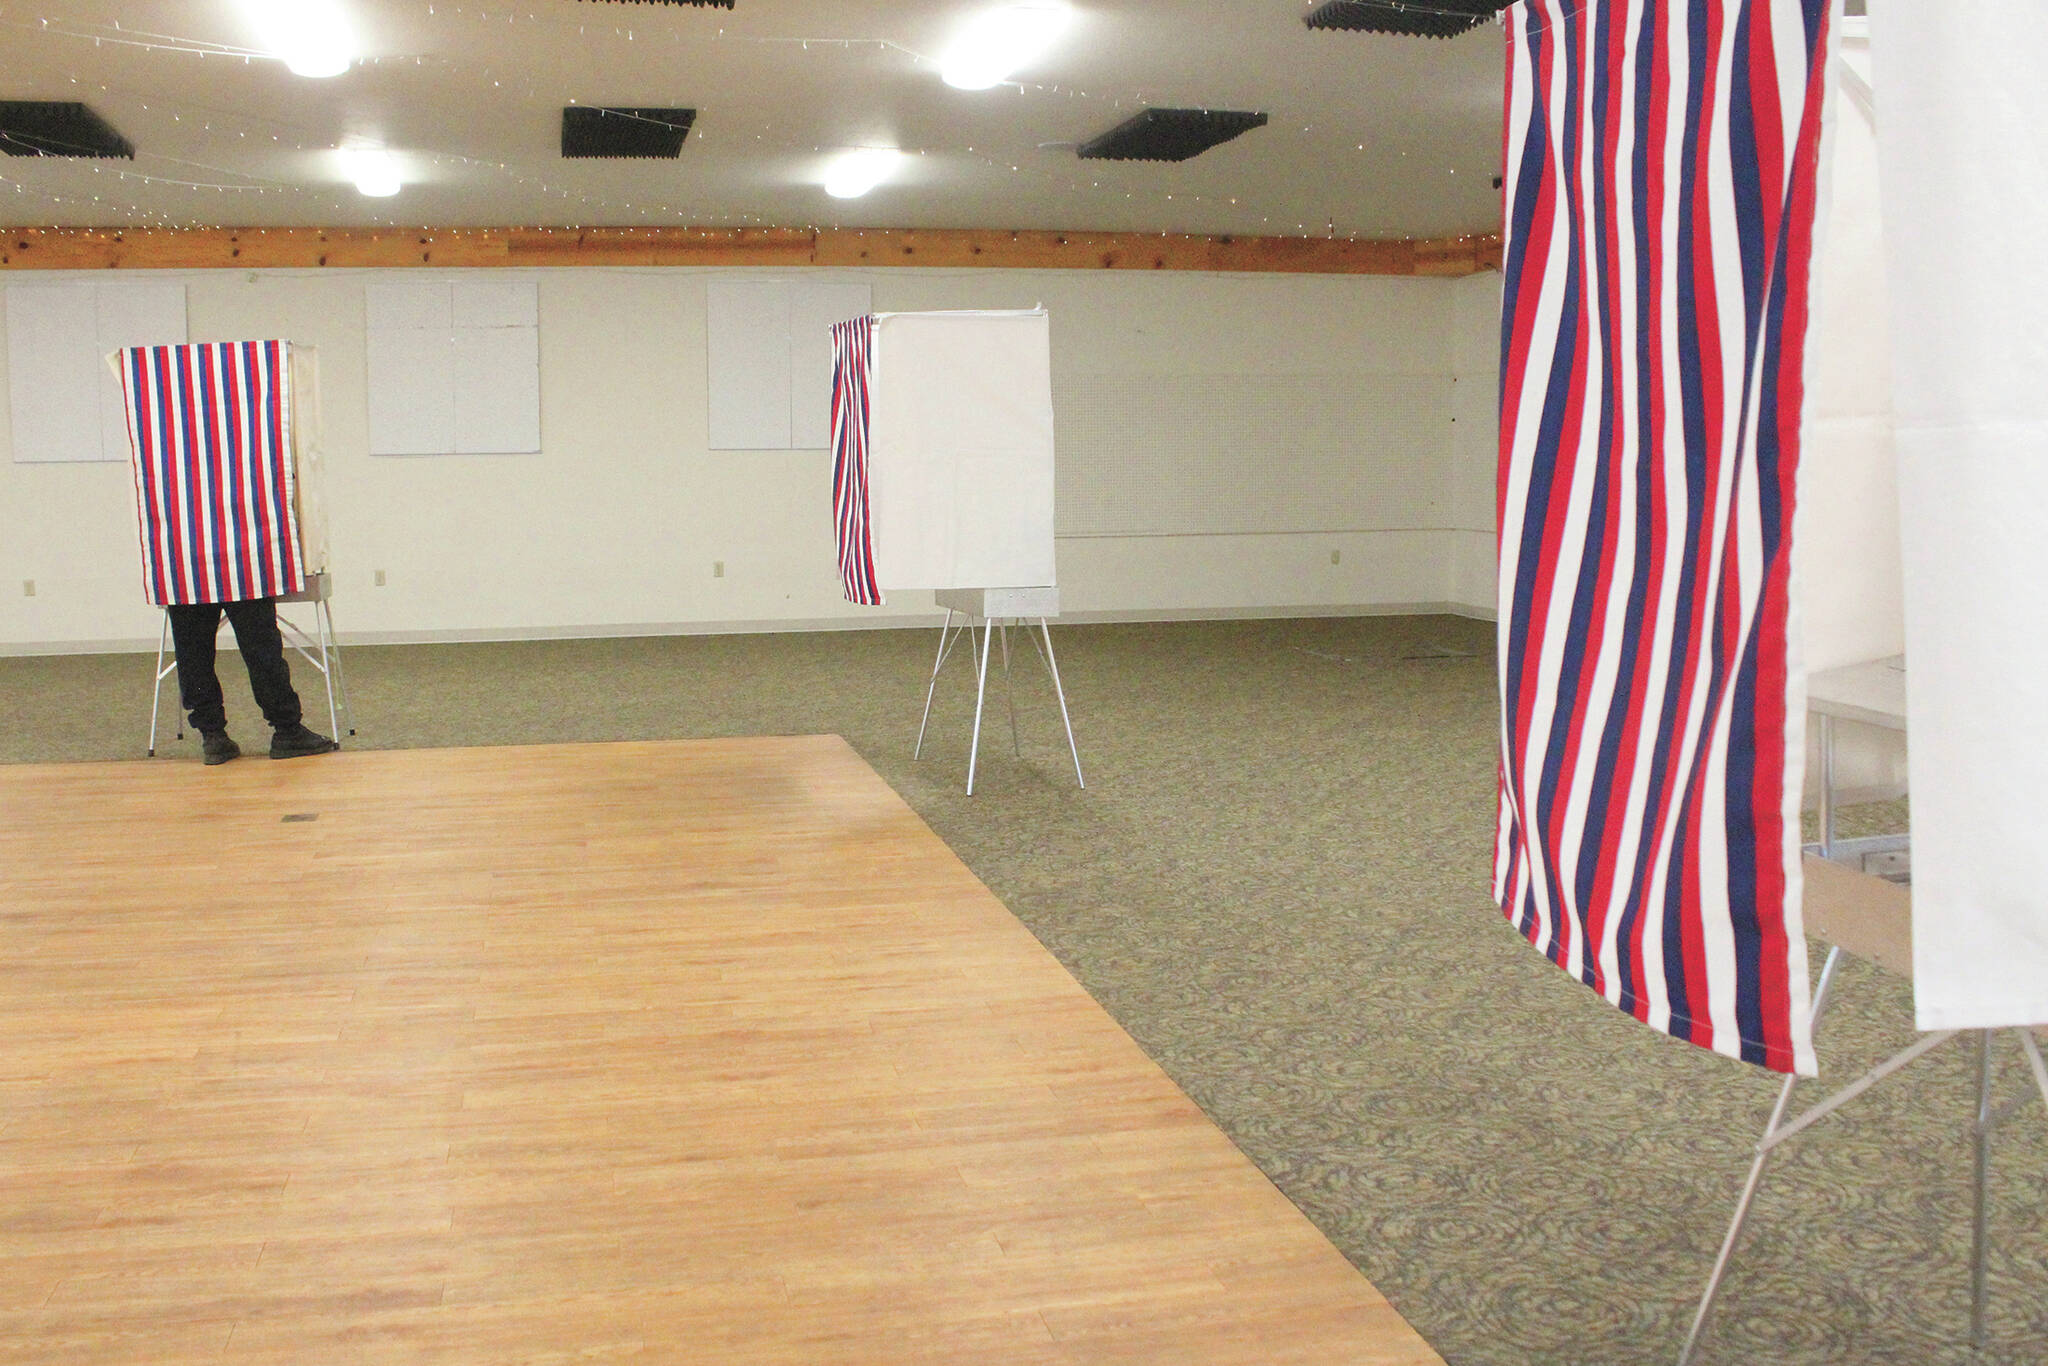 A resident casts their vote in the regular municipal election Tuesday, Oct. 6, 2020, at the Kenai Peninsula Fairgrounds in Ninilchik, Alaska. (Photo by Megan Pacer/Homer News file)